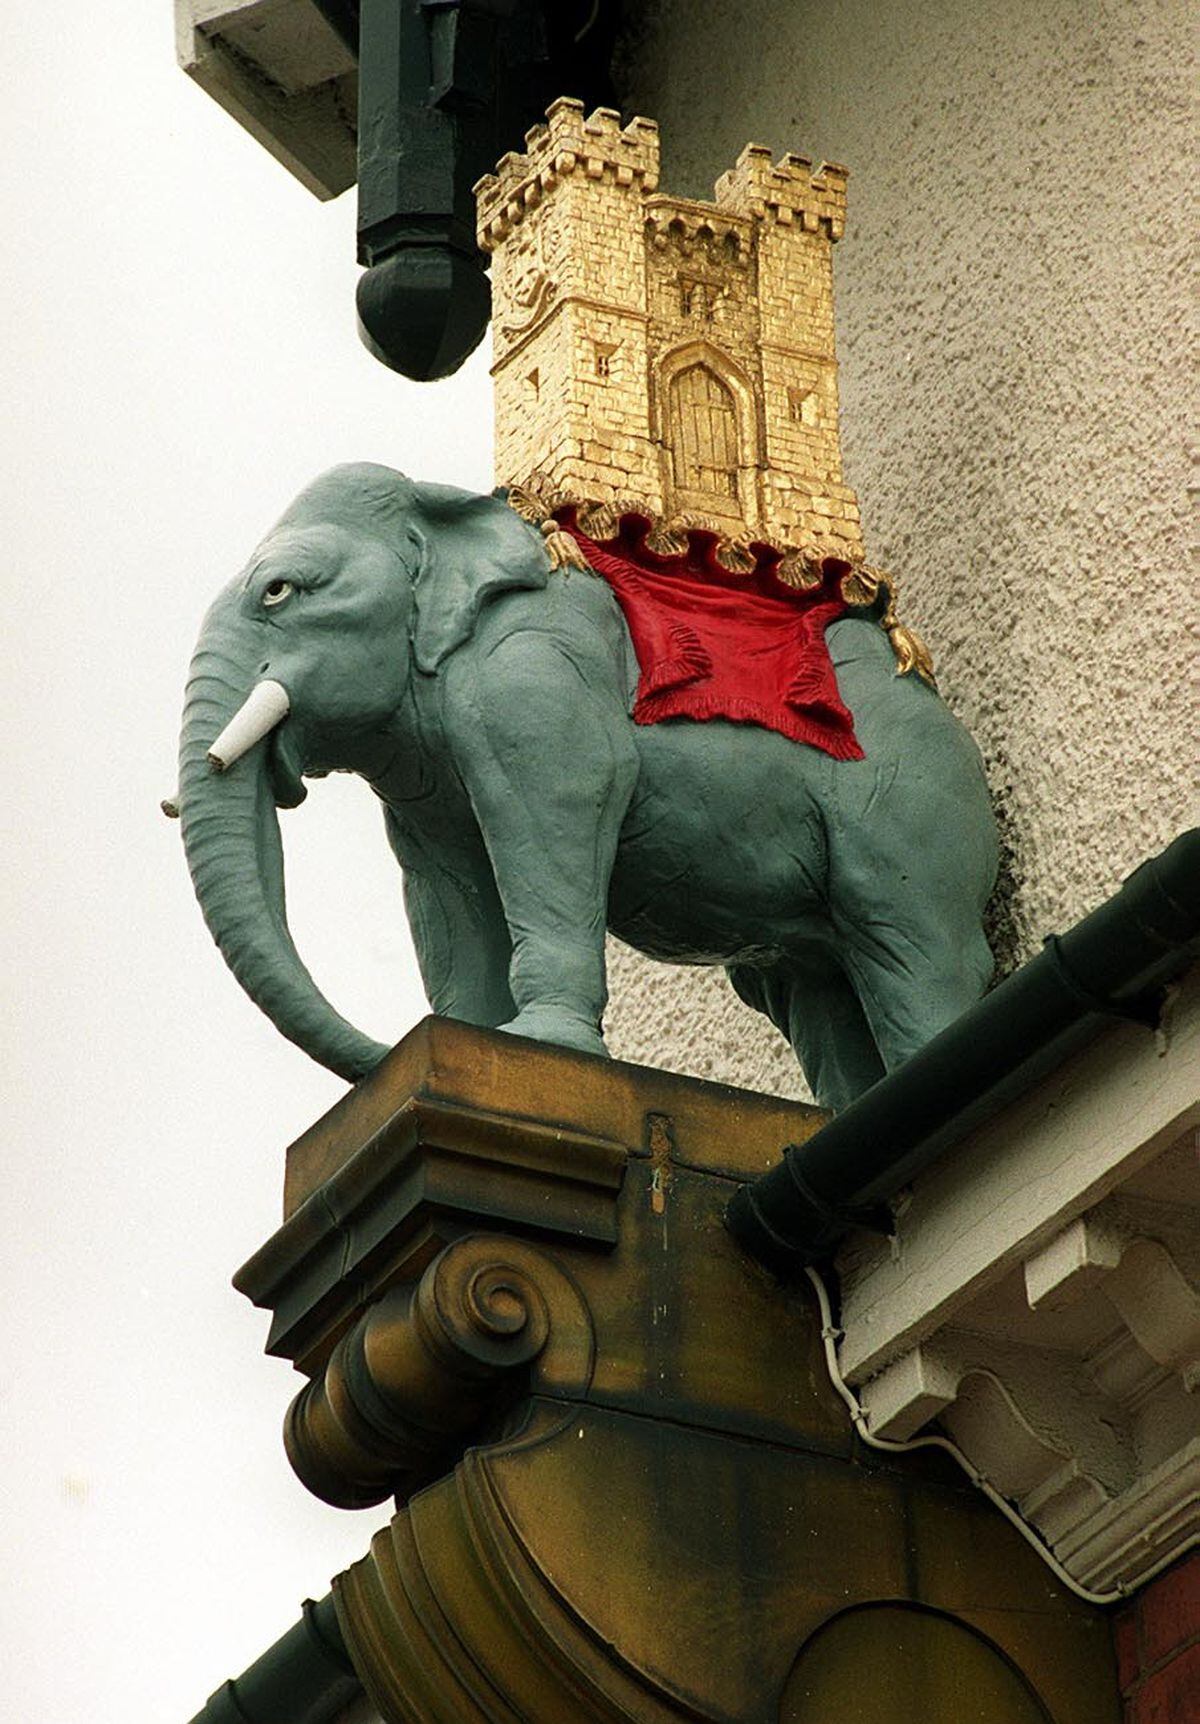 The elephant with a castle on its back that stood overlooking the junction from the wall of the pub